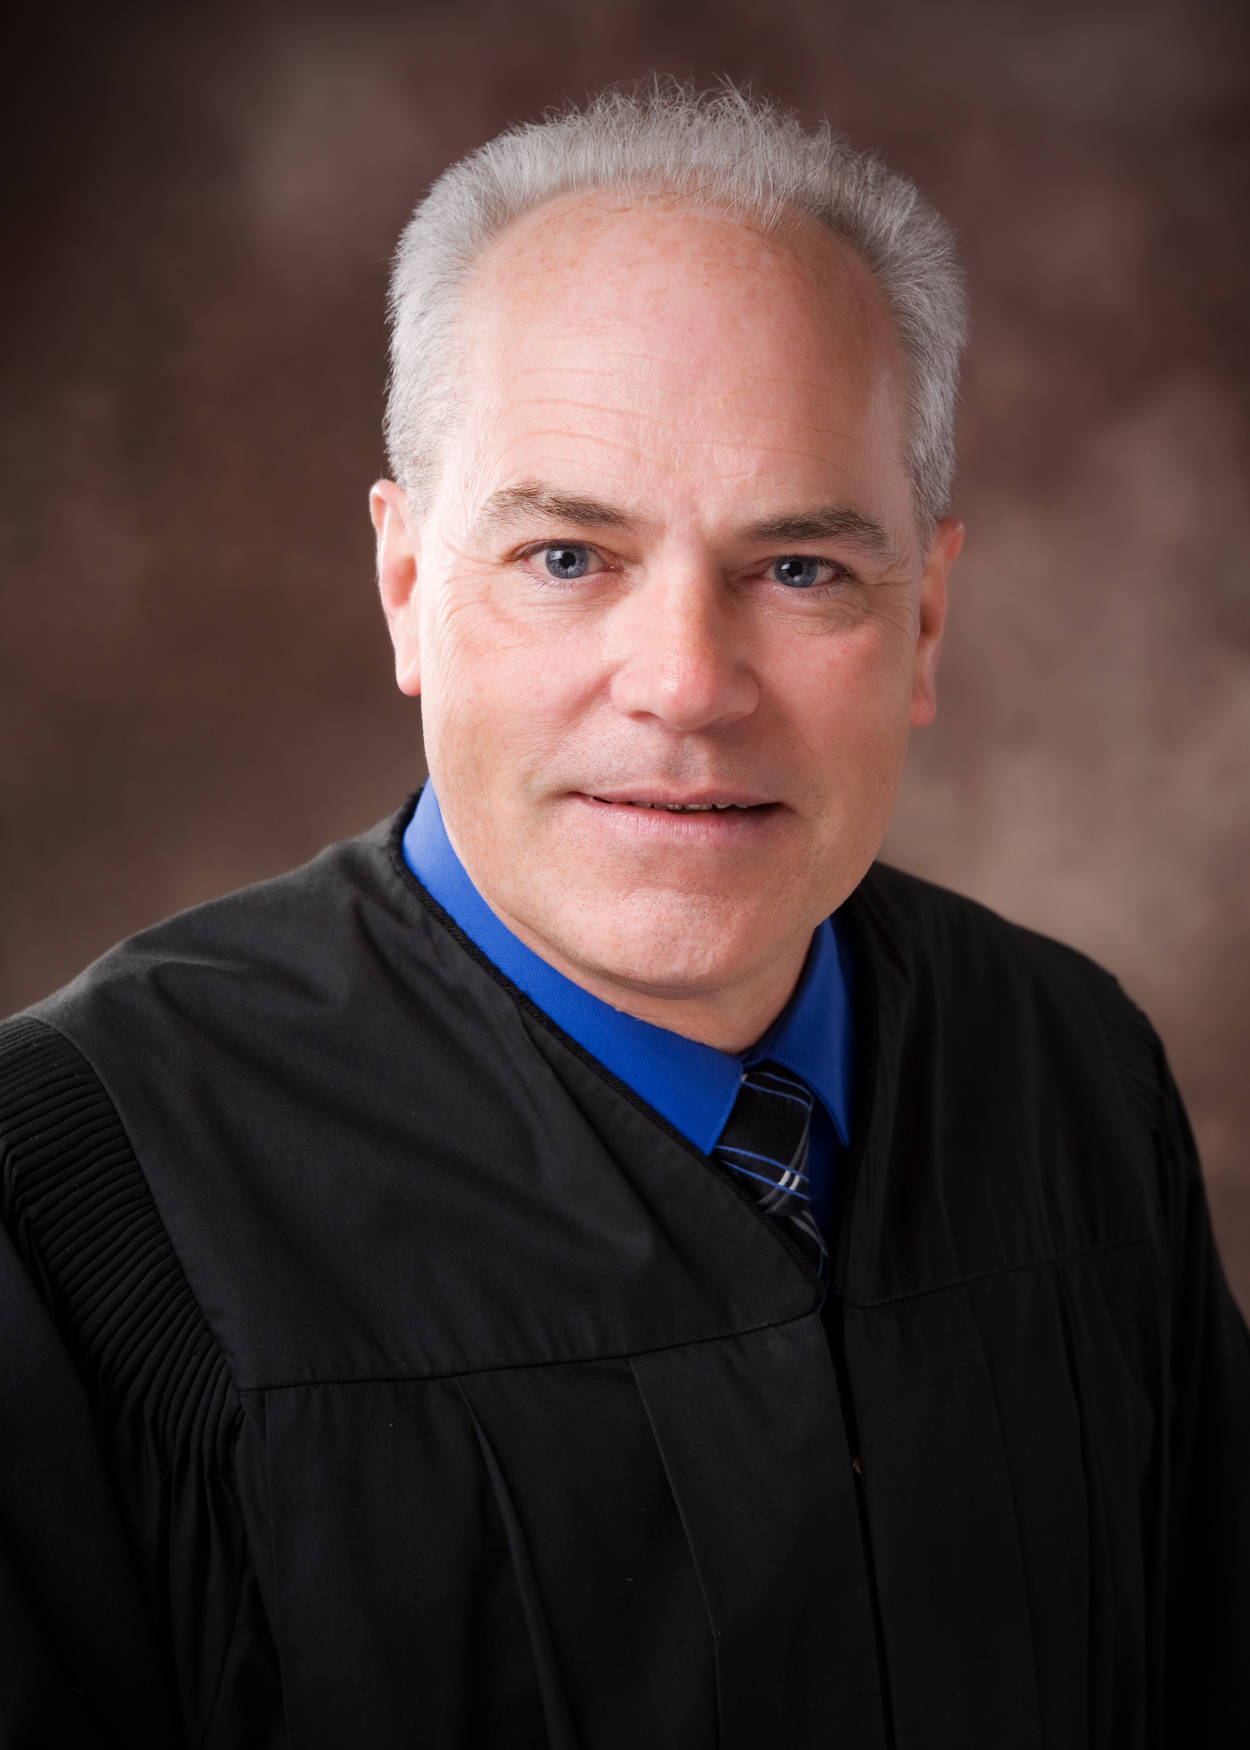 Retiring Judge Rohrer Reflects on 20 years at Clallam County Courts